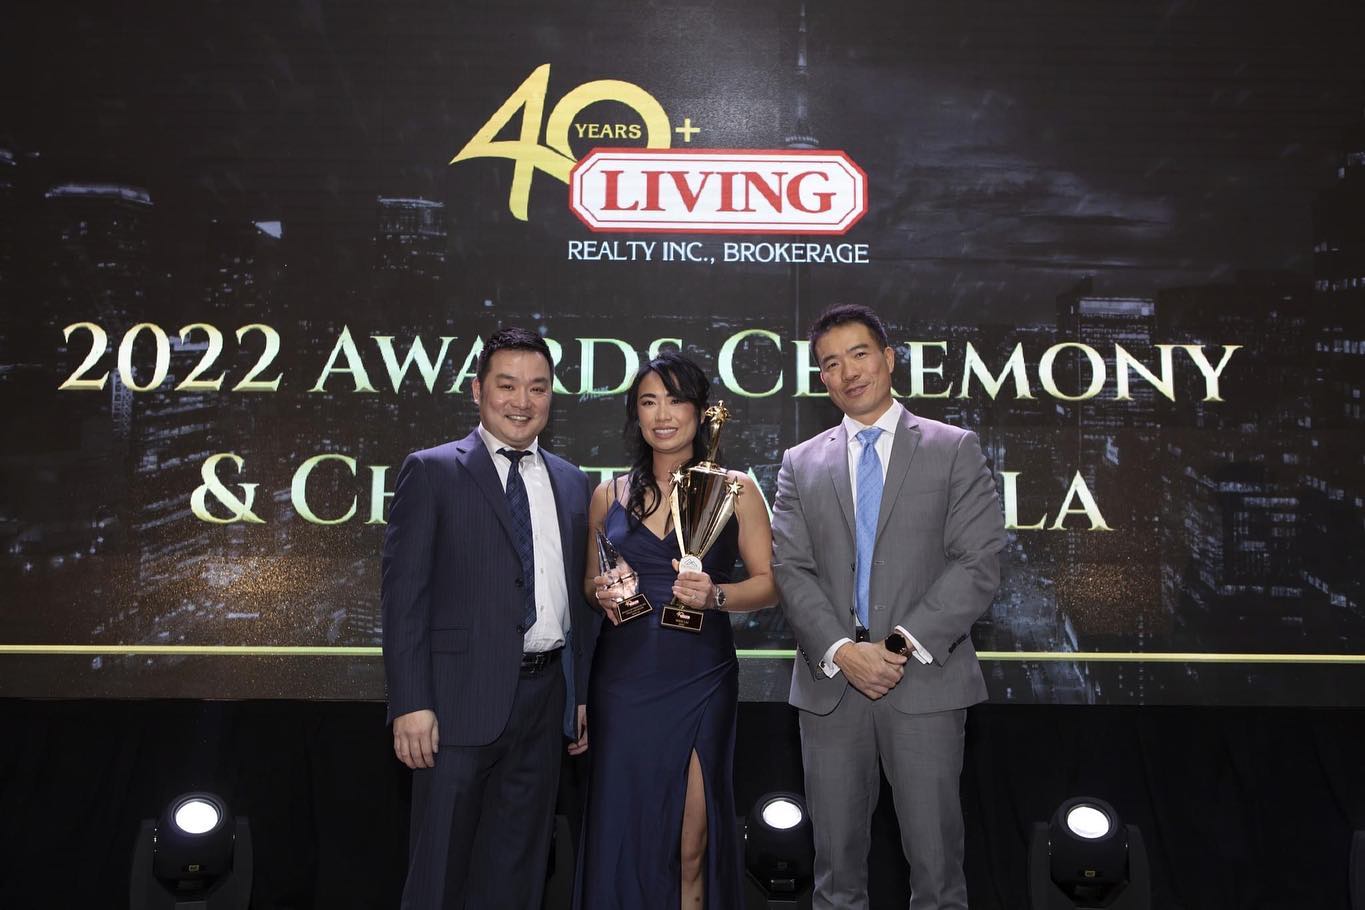 Wins Lai holding awards at 2022 Living Realty Top Producer ceremony.